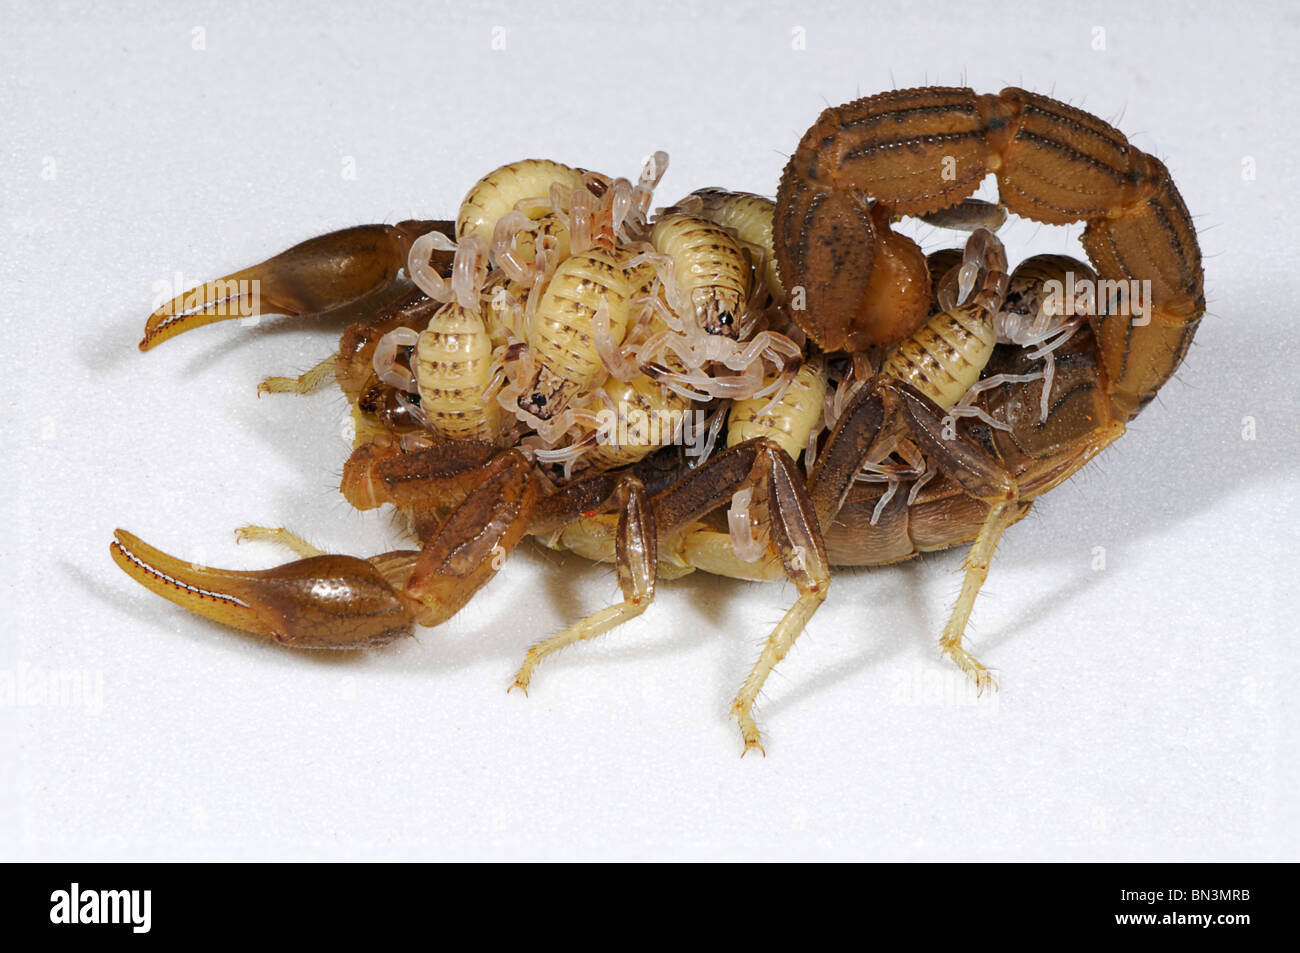 Hottentota scorpion, photographed in Tanzania, Africa carrying its young on its back, a feature of its maternal behavior. Stock Photo